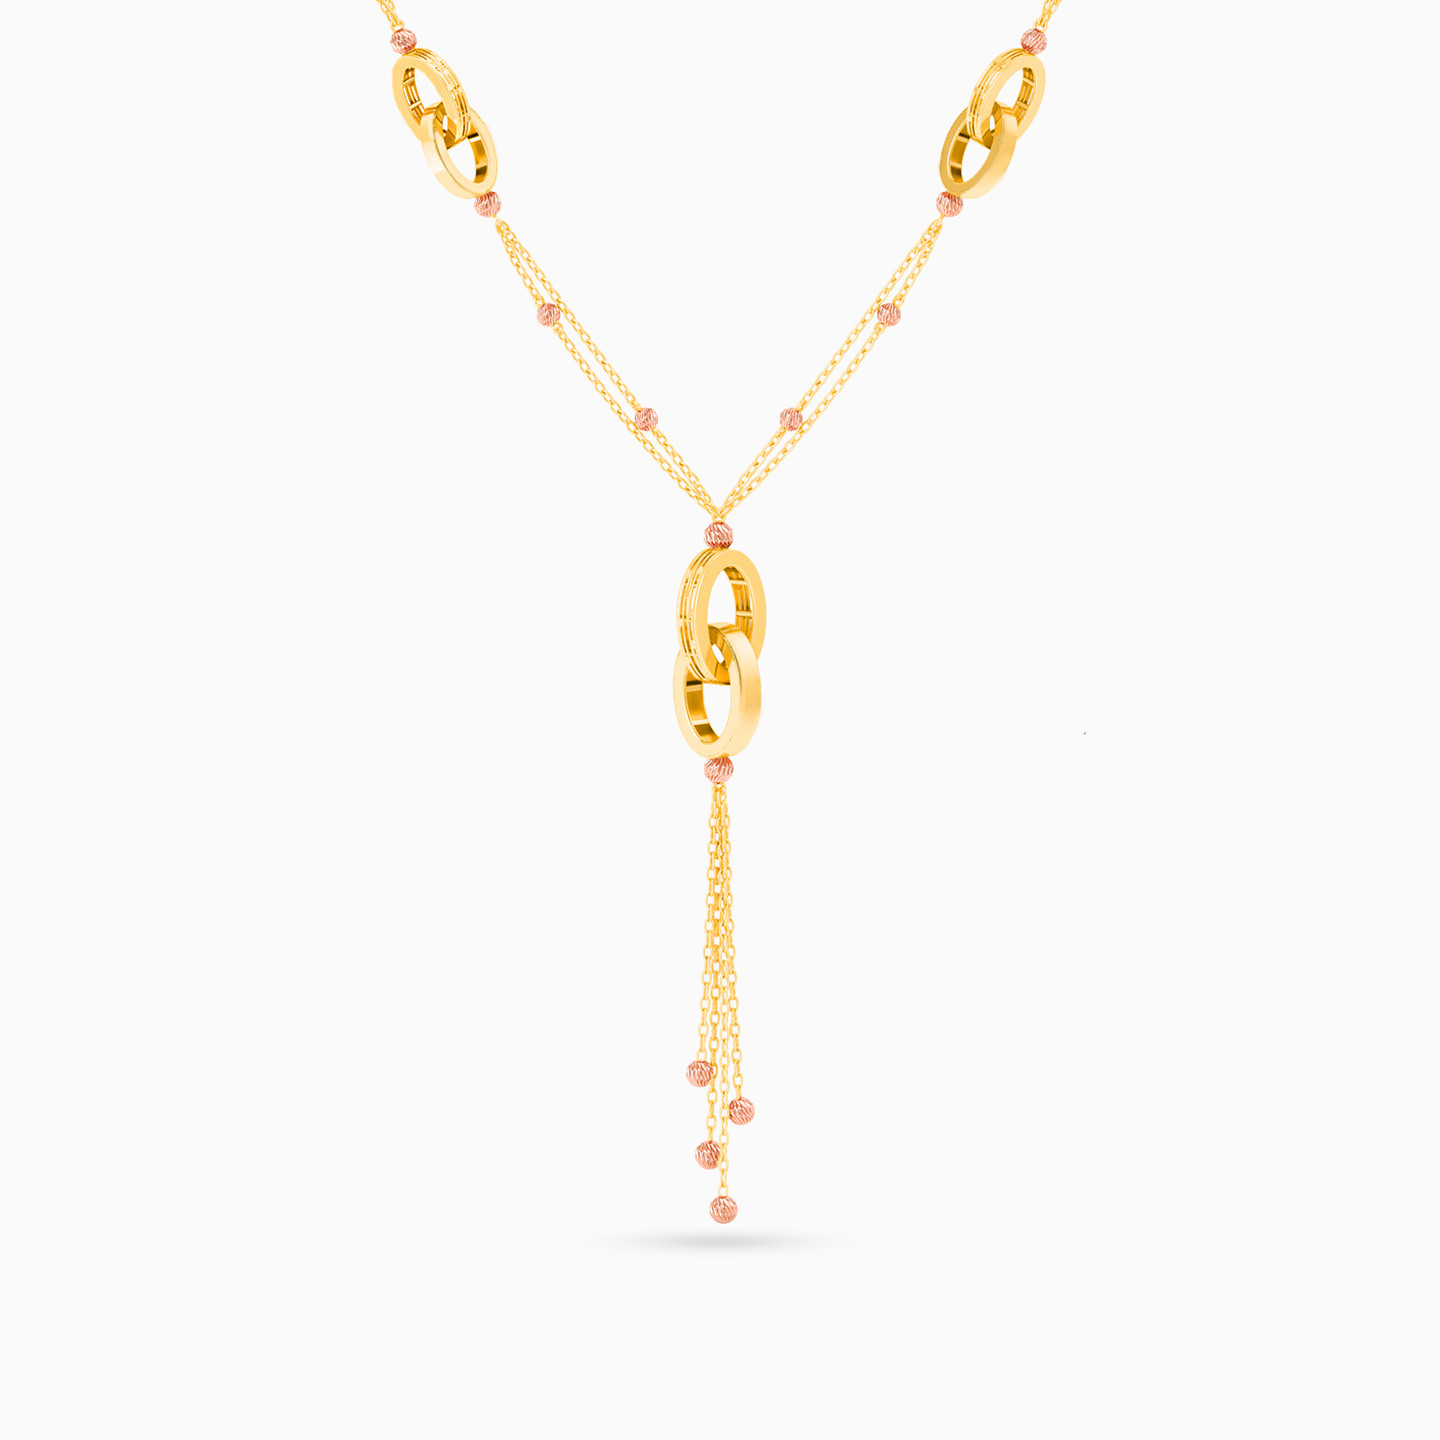 21K Gold Chain Necklace